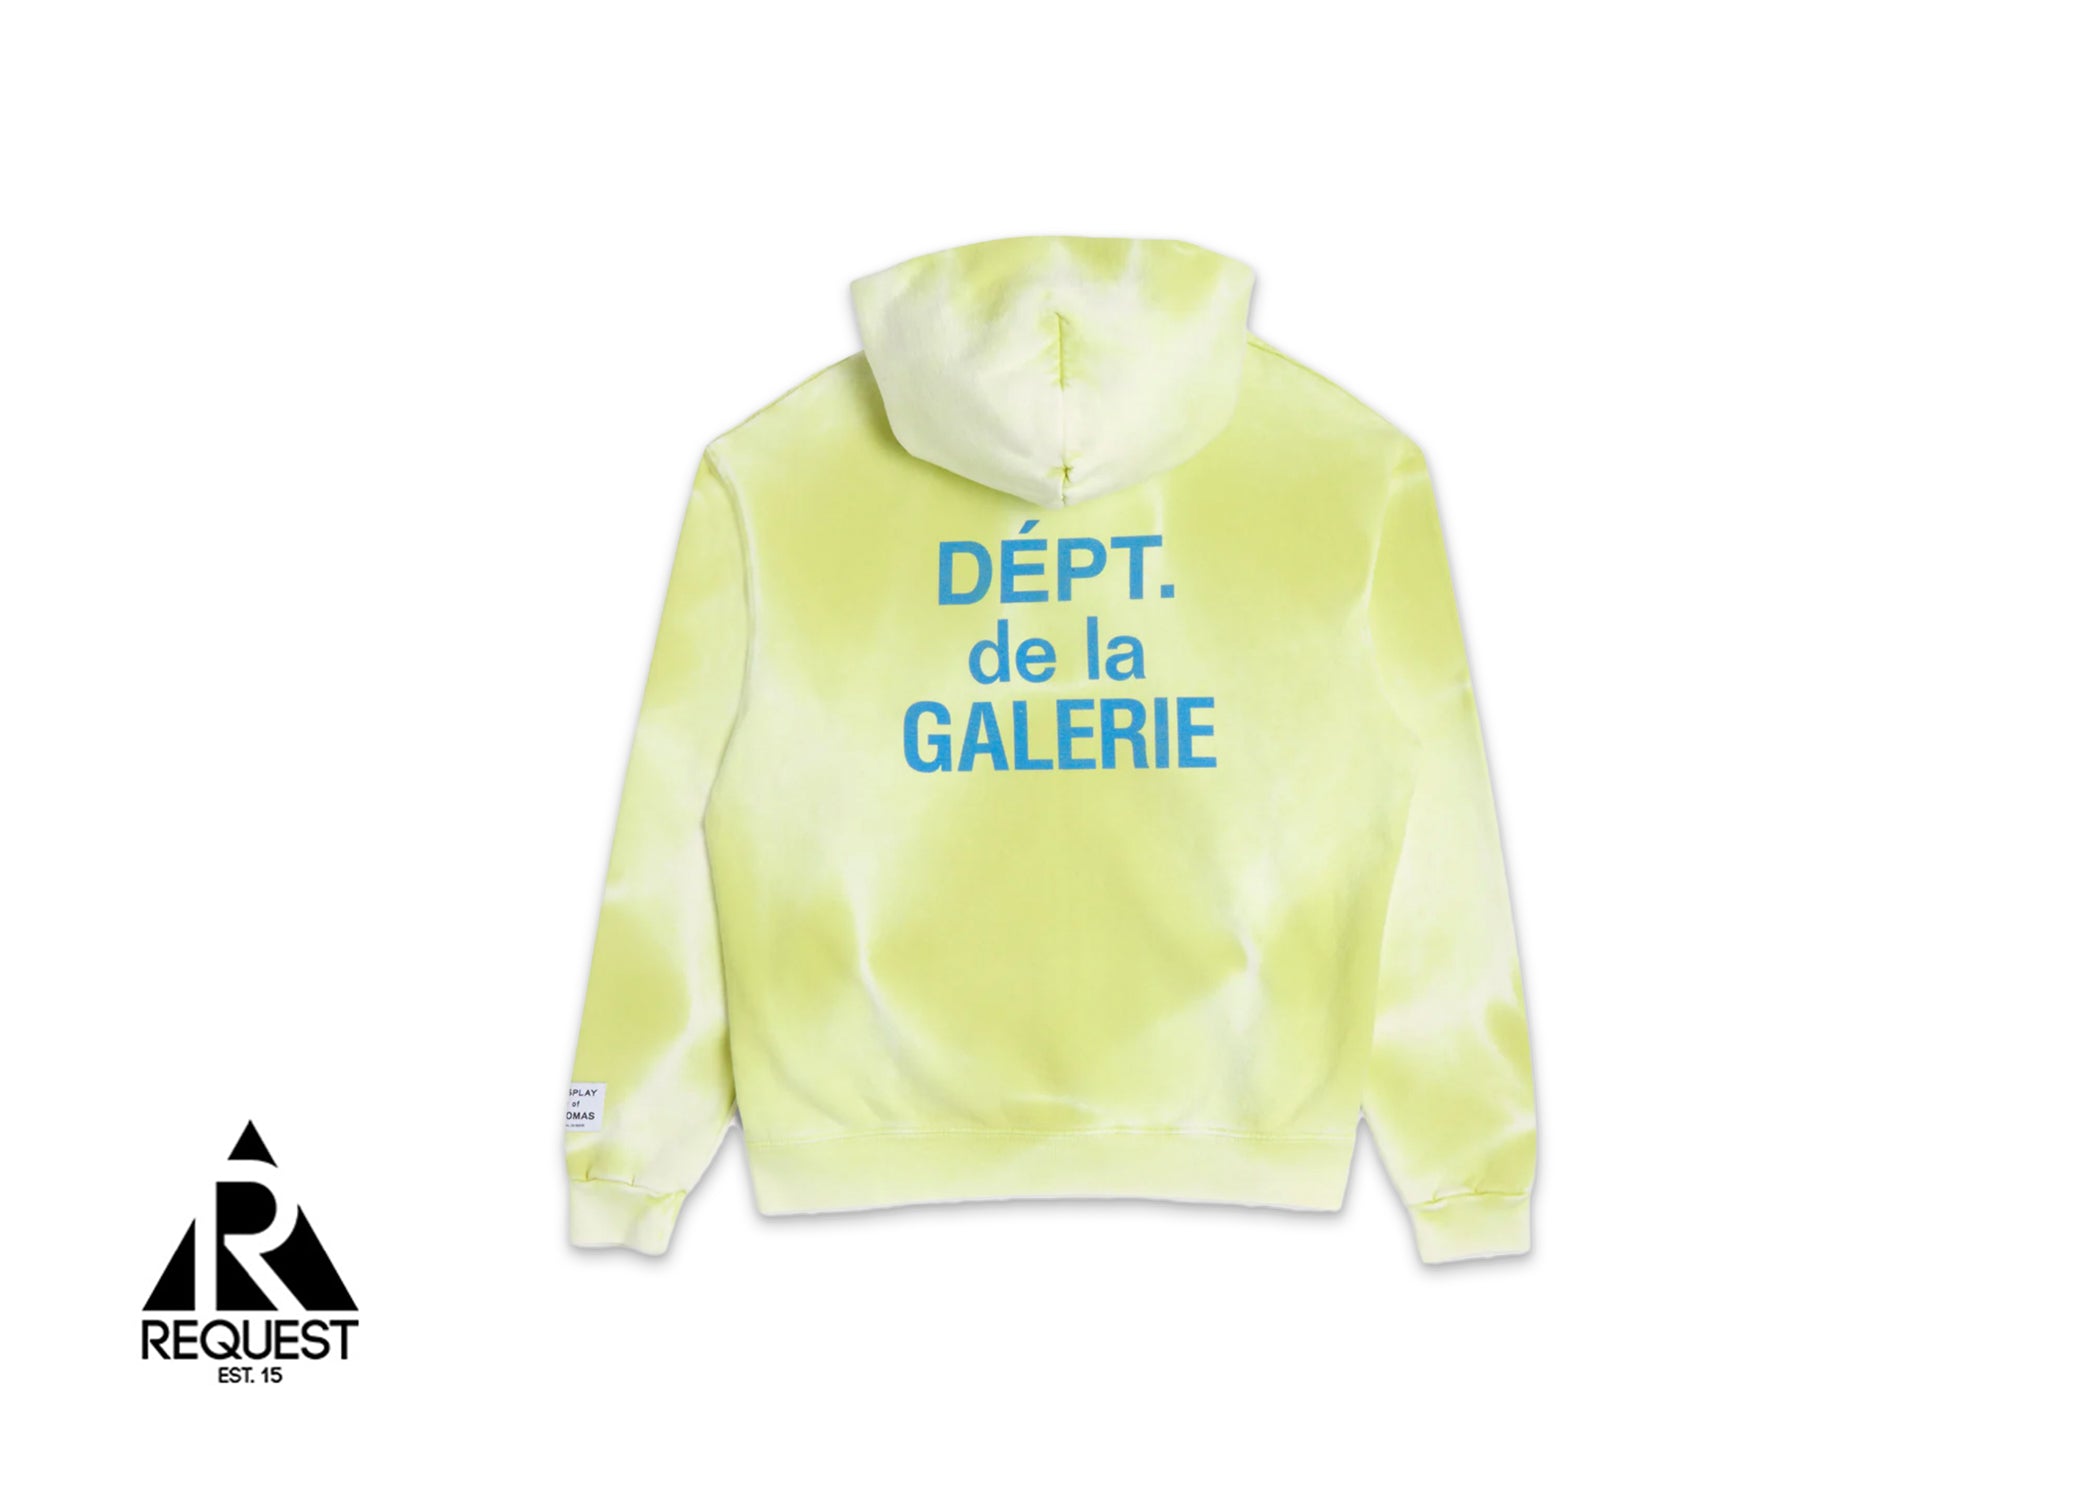 Gallery Dept. French Zip Up "Lime Green"